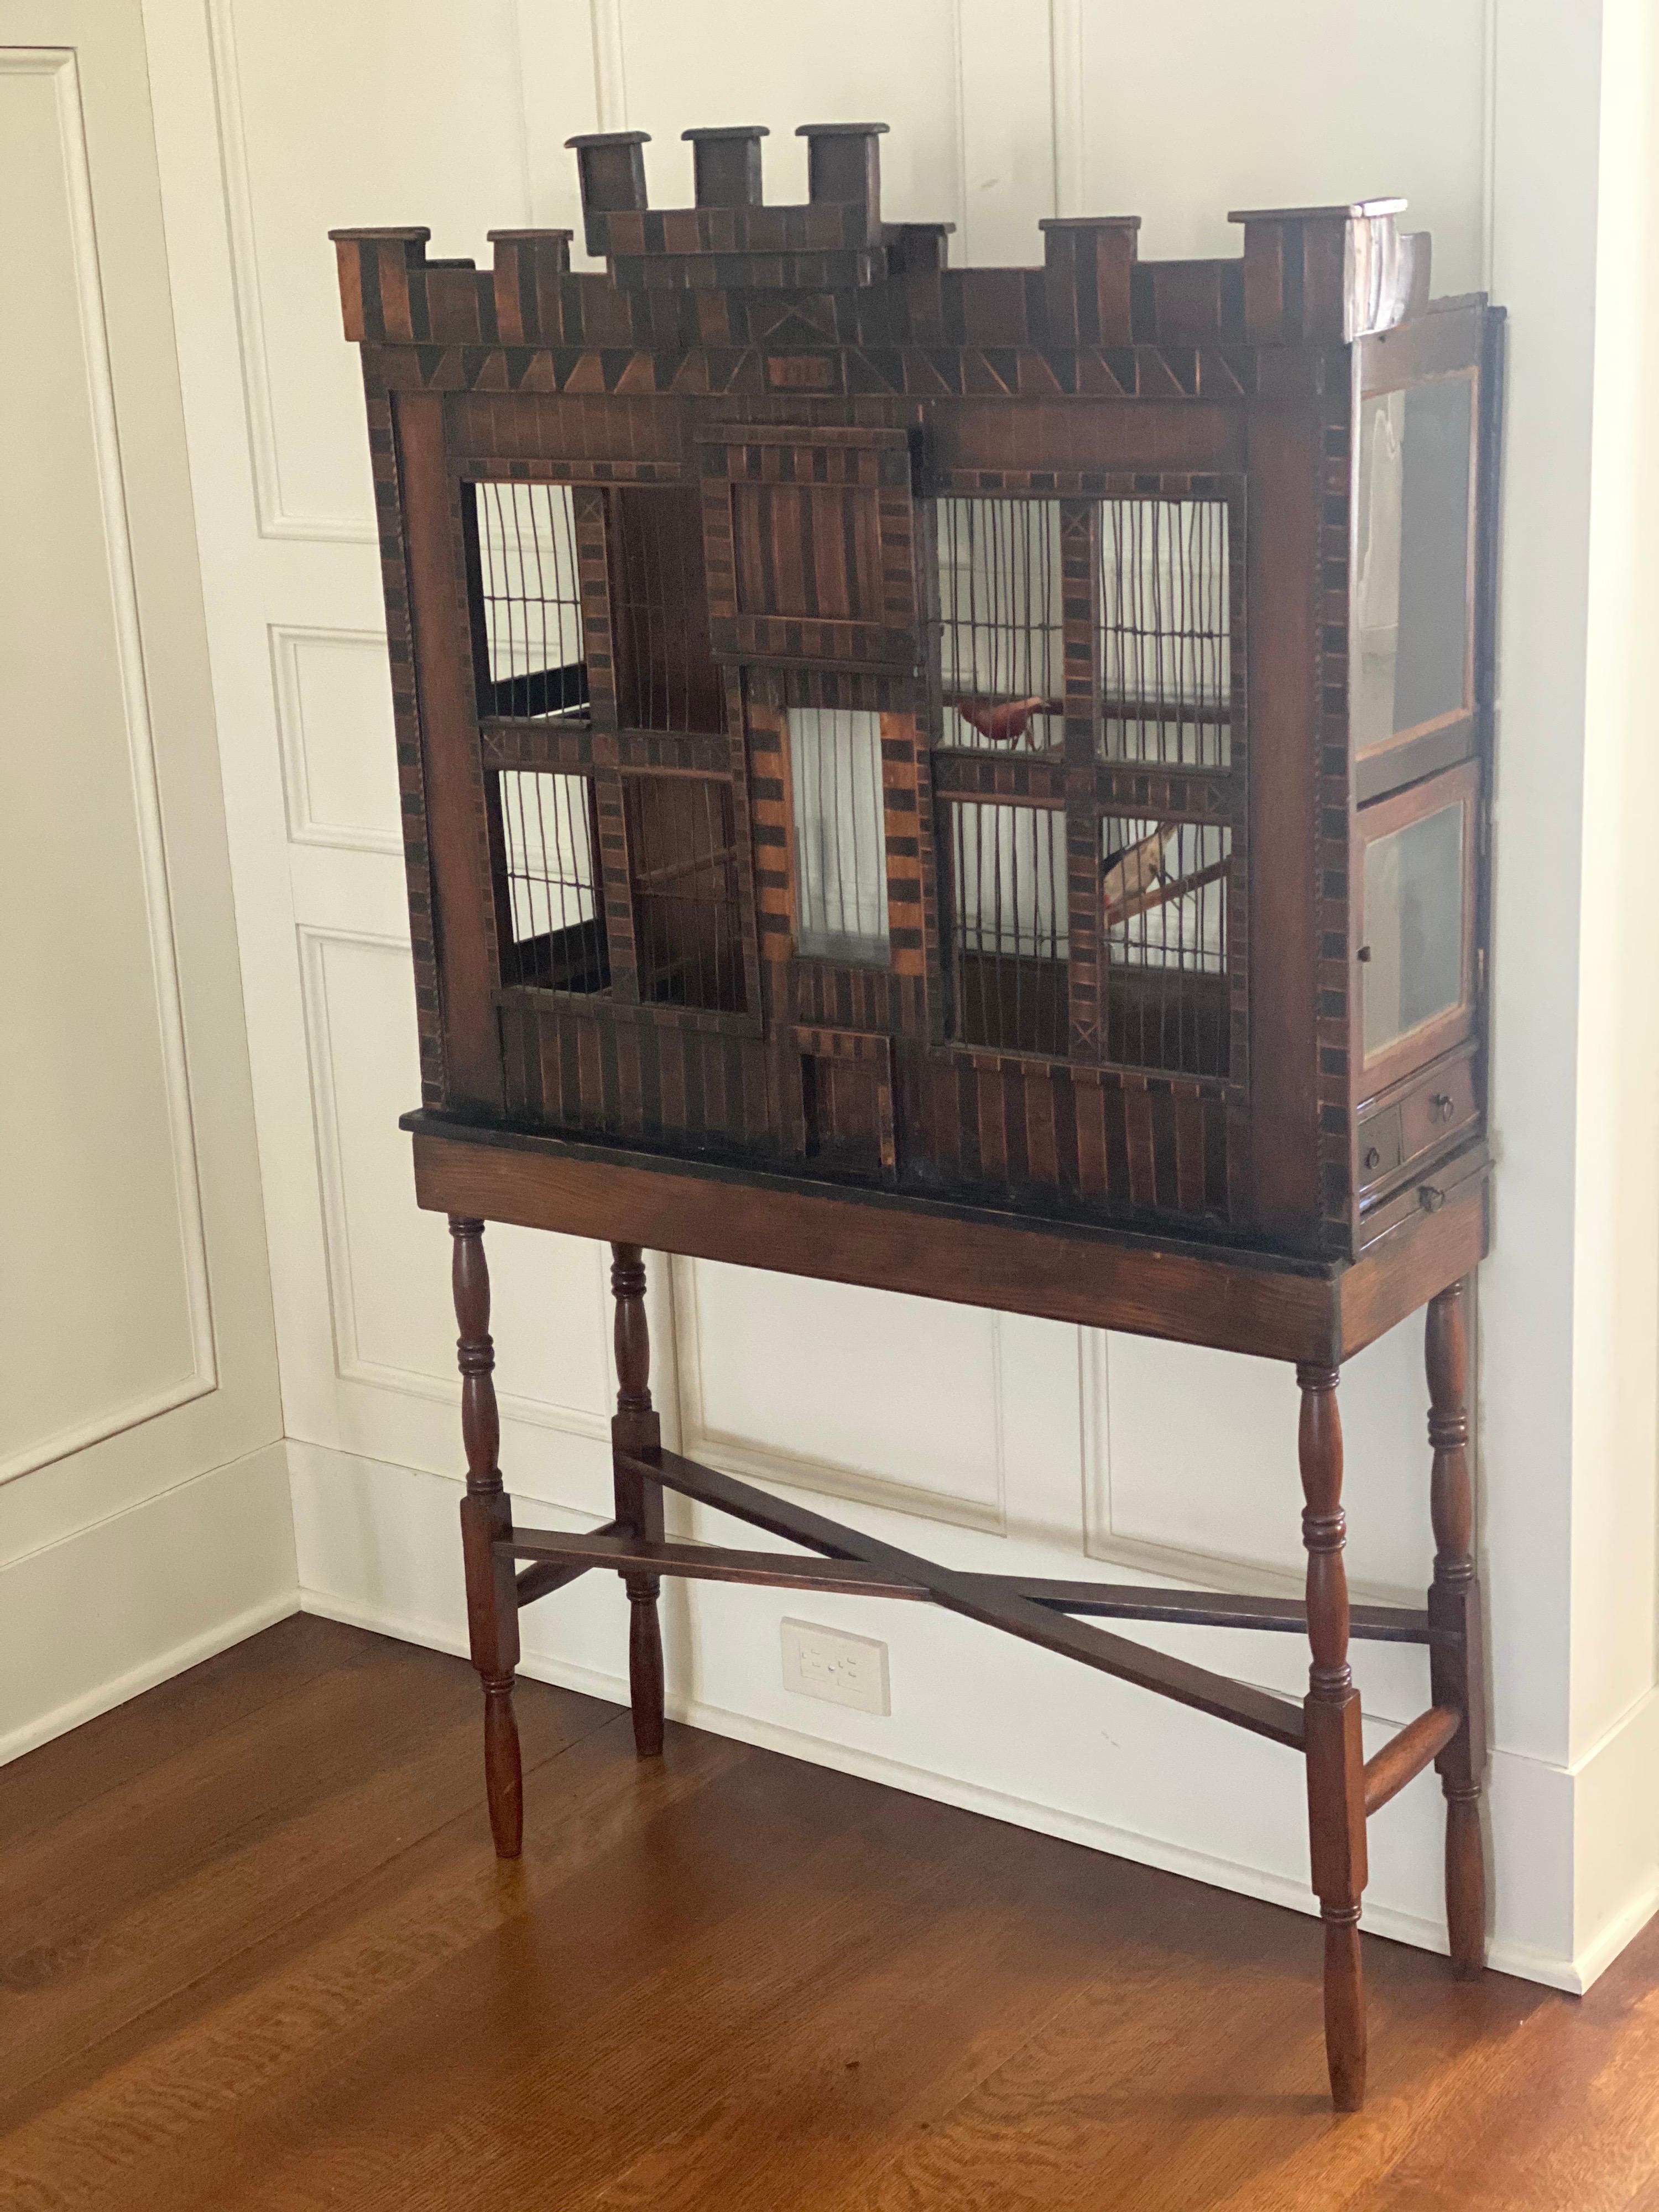 English birdcage made from wood with date 1740 inlaid in the cresting. The tall and narrow shape indicated use as a breading cage, for finches. The birdcage may have been made later out of earlier wood.
England, 1740.
Measures: 10.5